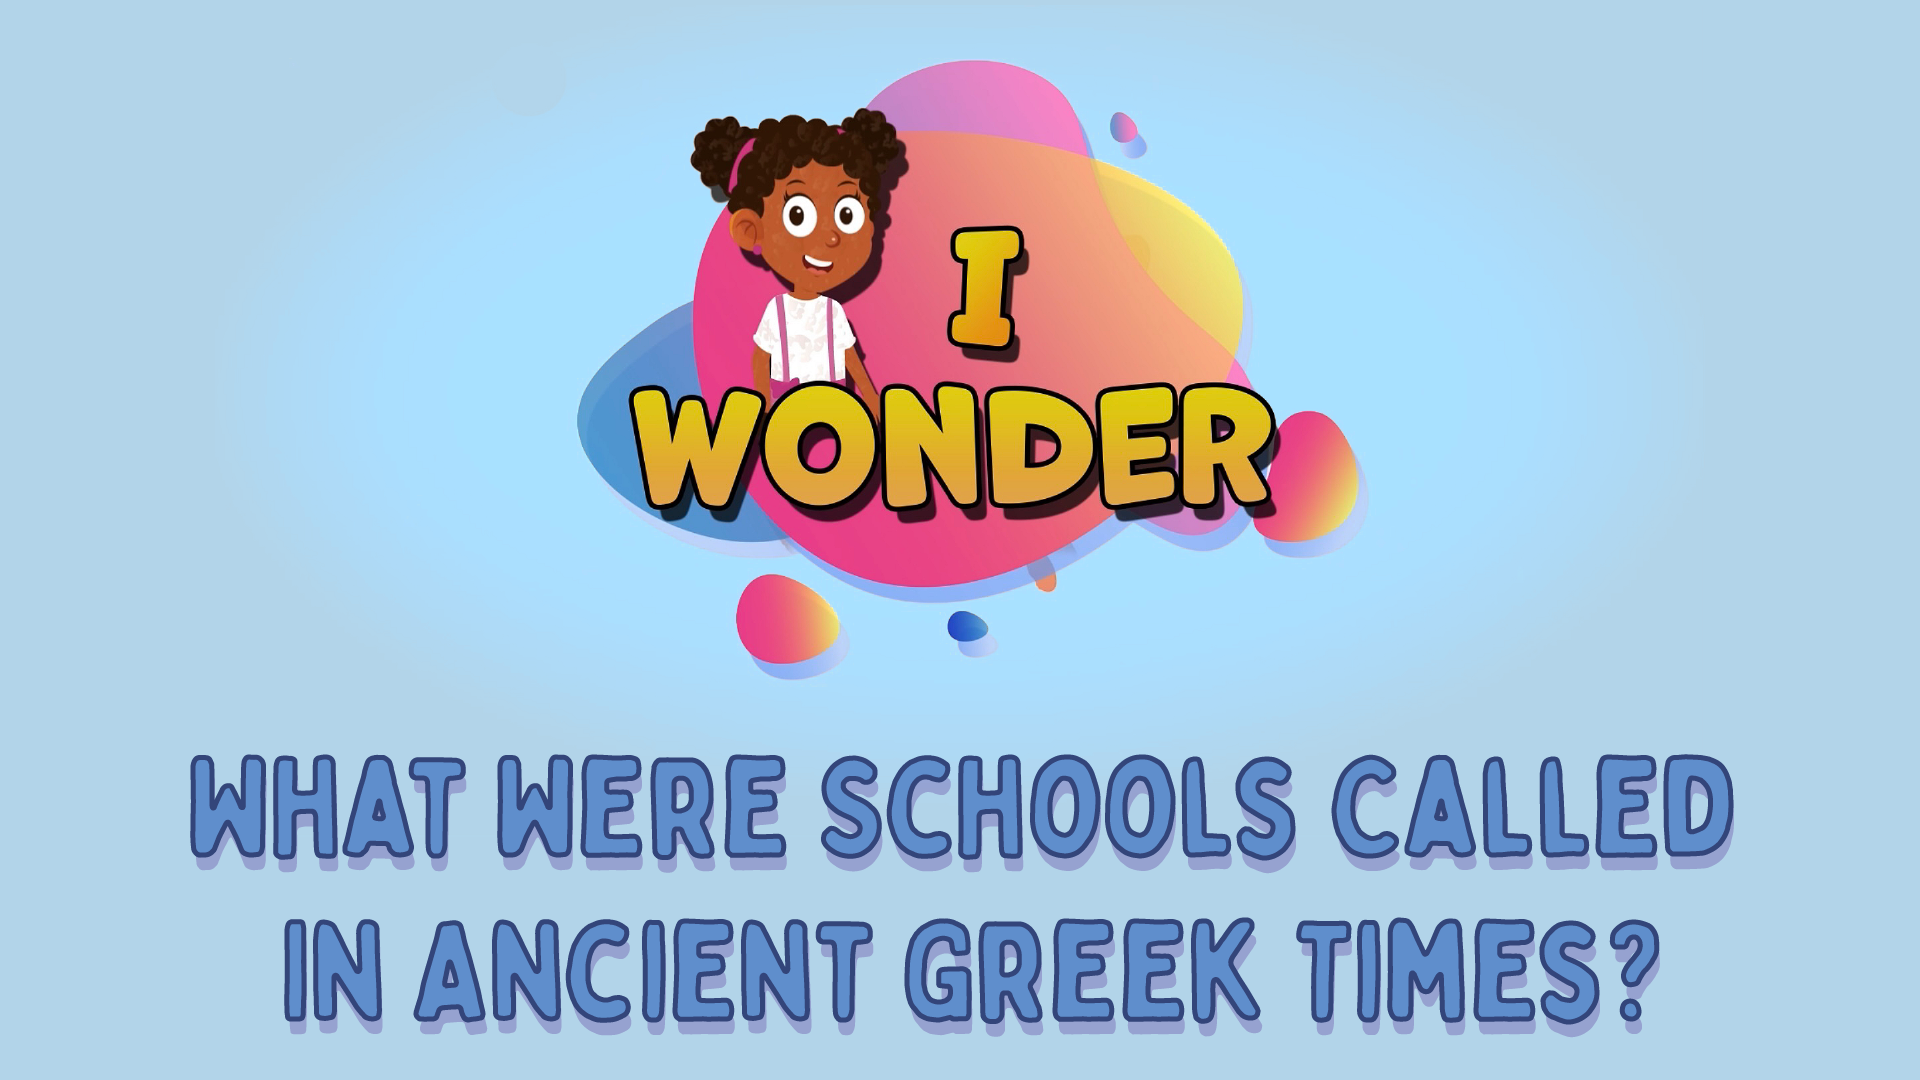 What Were Schools Called In Ancient Greek Times?